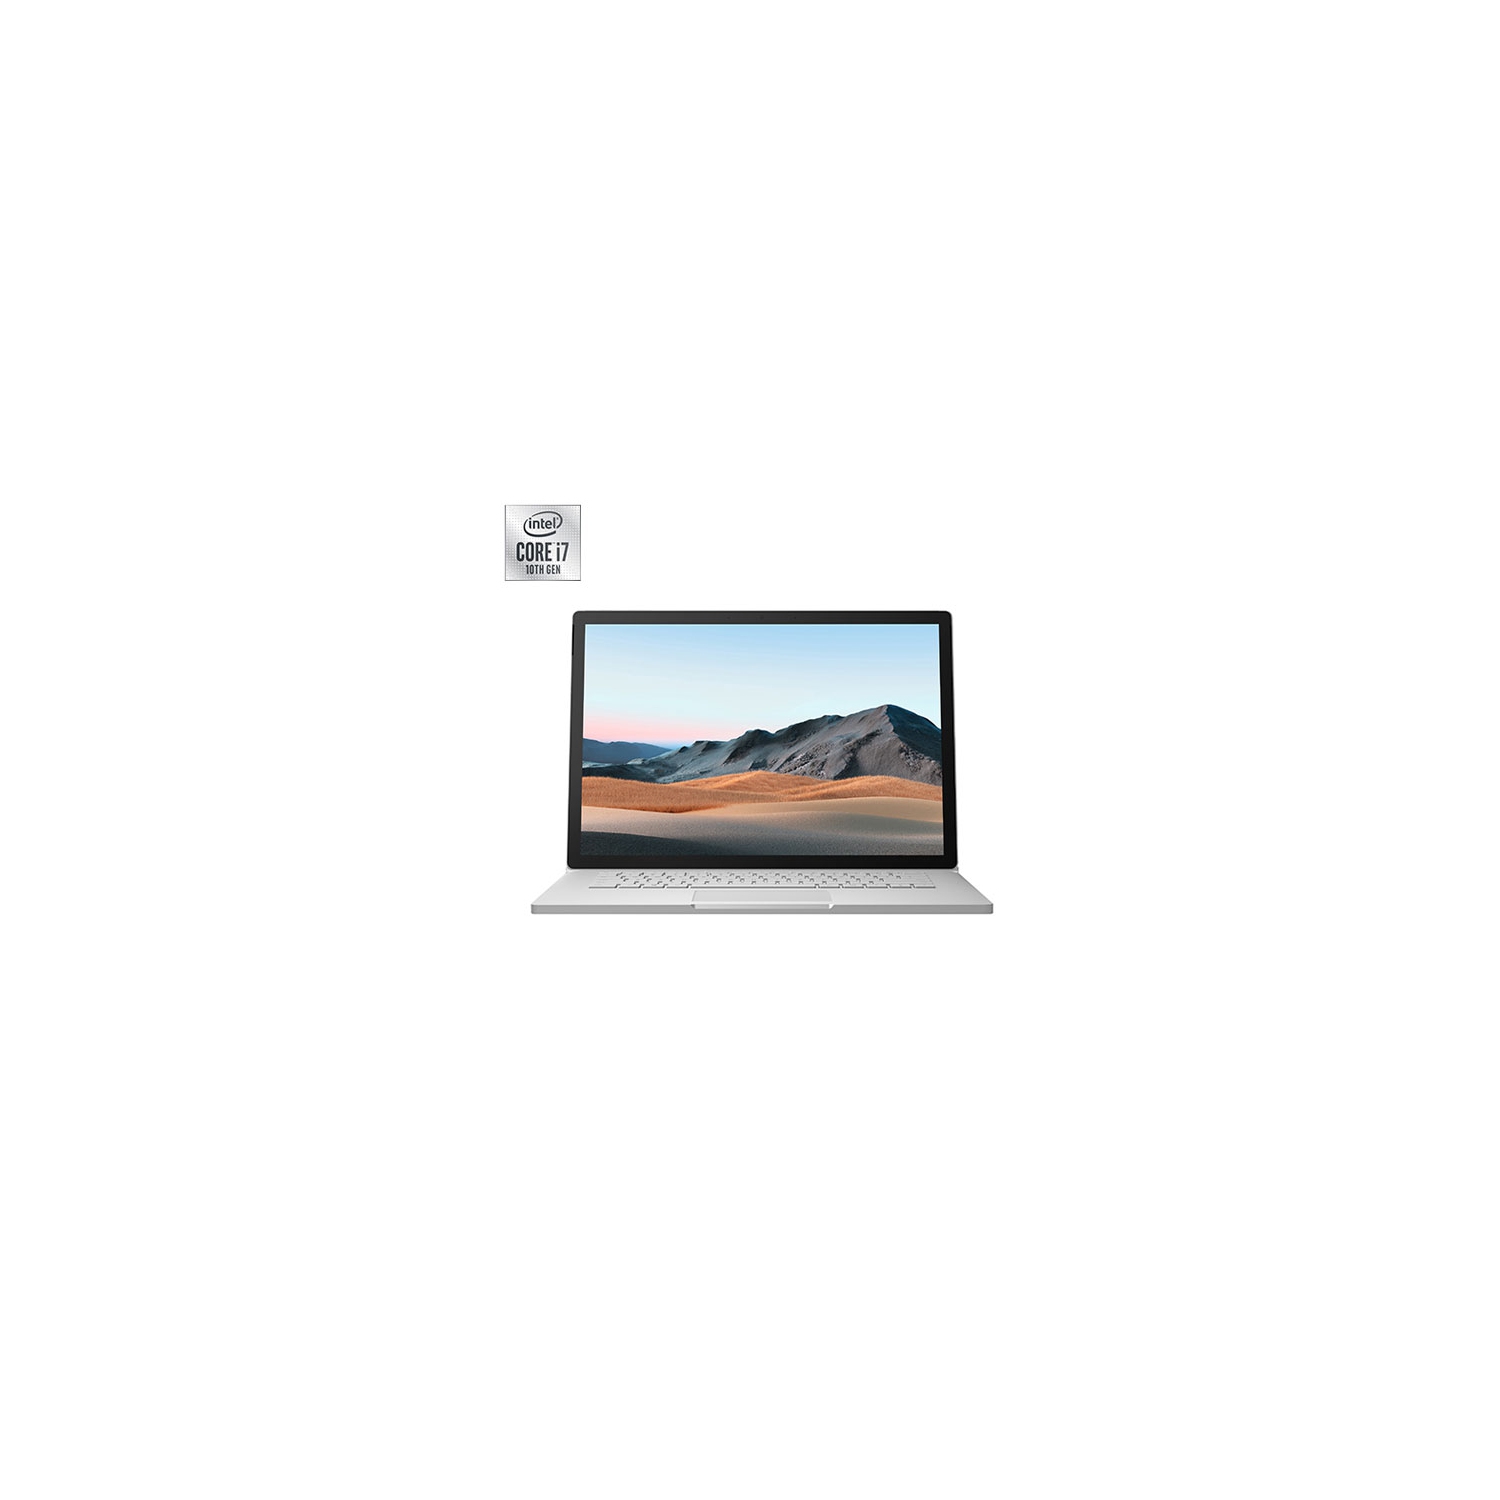 Refurbished (Excellent) - Microsoft Surface Book 3 15" 2-in-1 Laptop - Platinum (Intel Ci7-1065G7/1TB SSD/32GB RAM) - French